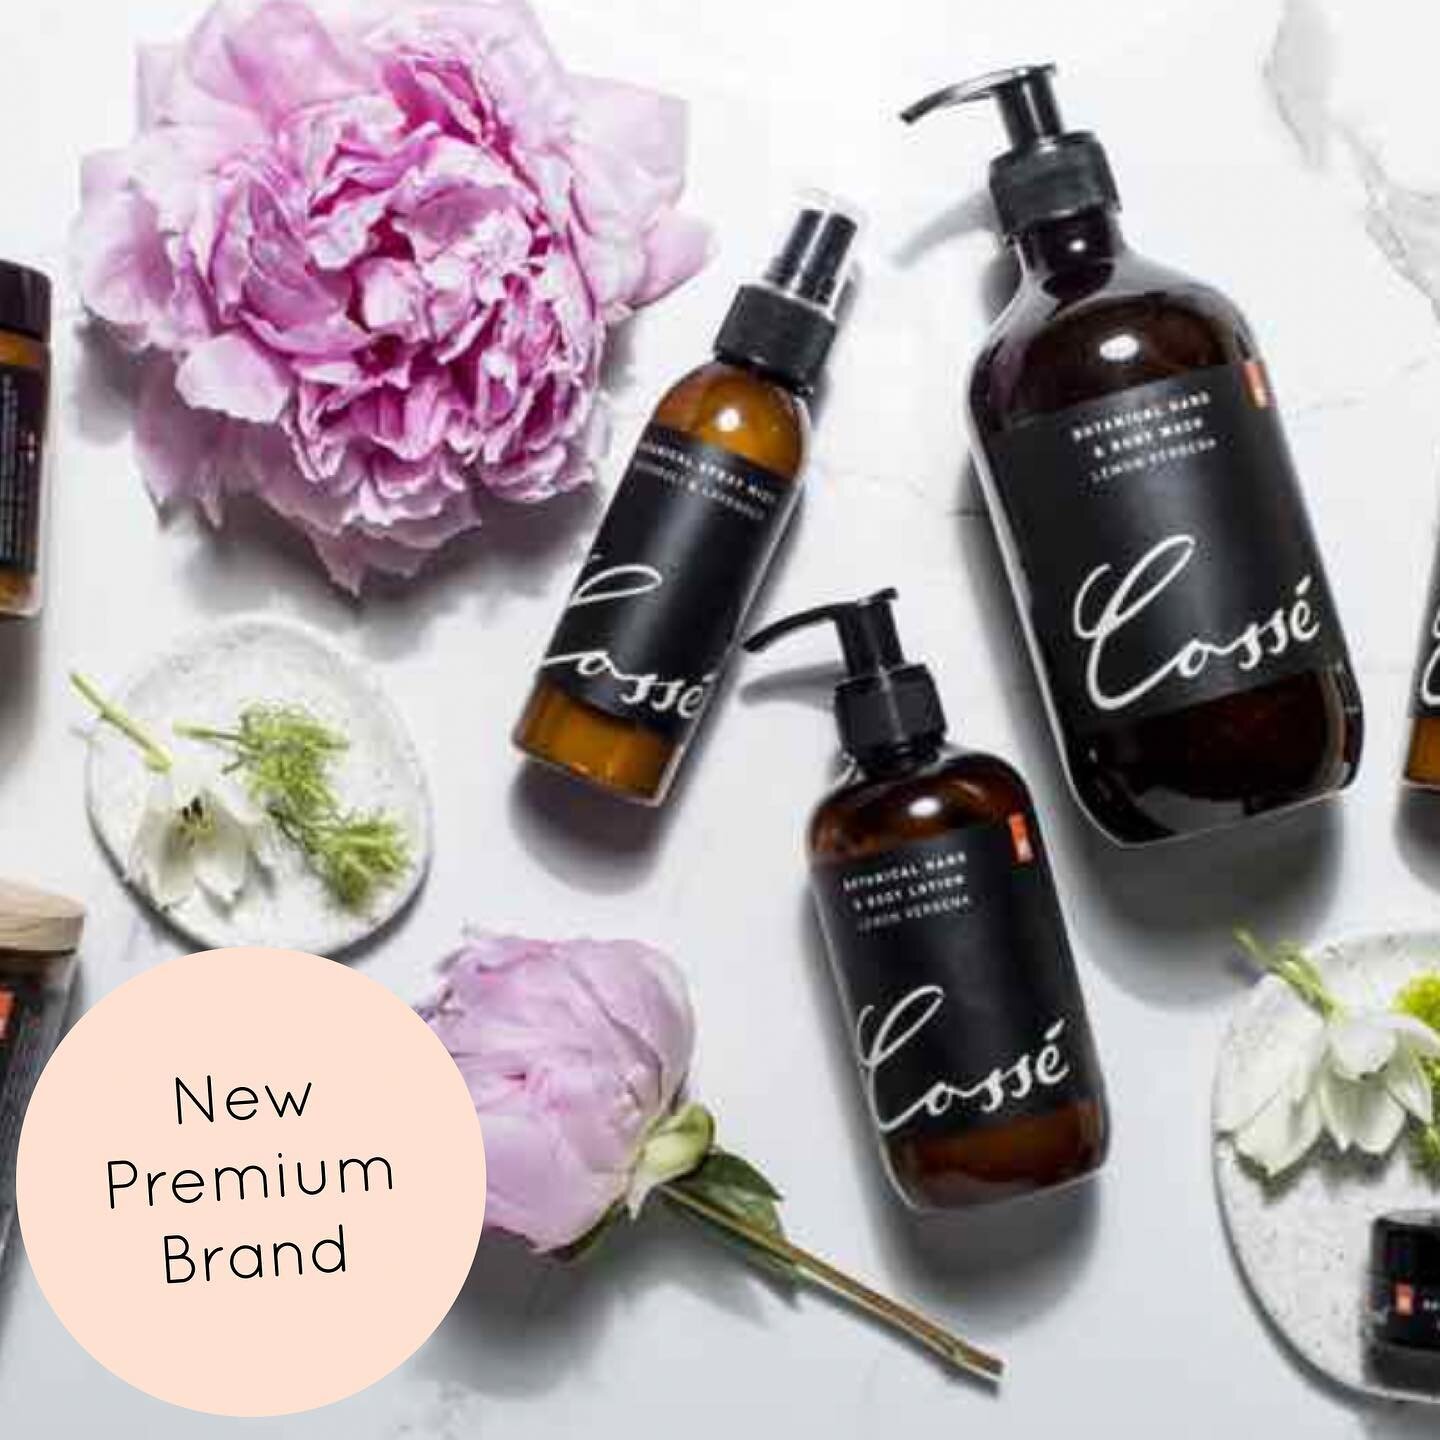 Have you heard of @cosse_products? Handmade botanical body care made with love in small batches using the finest ingredients and essential oils. This premium brand has Free Shipping for March! So swipe right on their profile now!